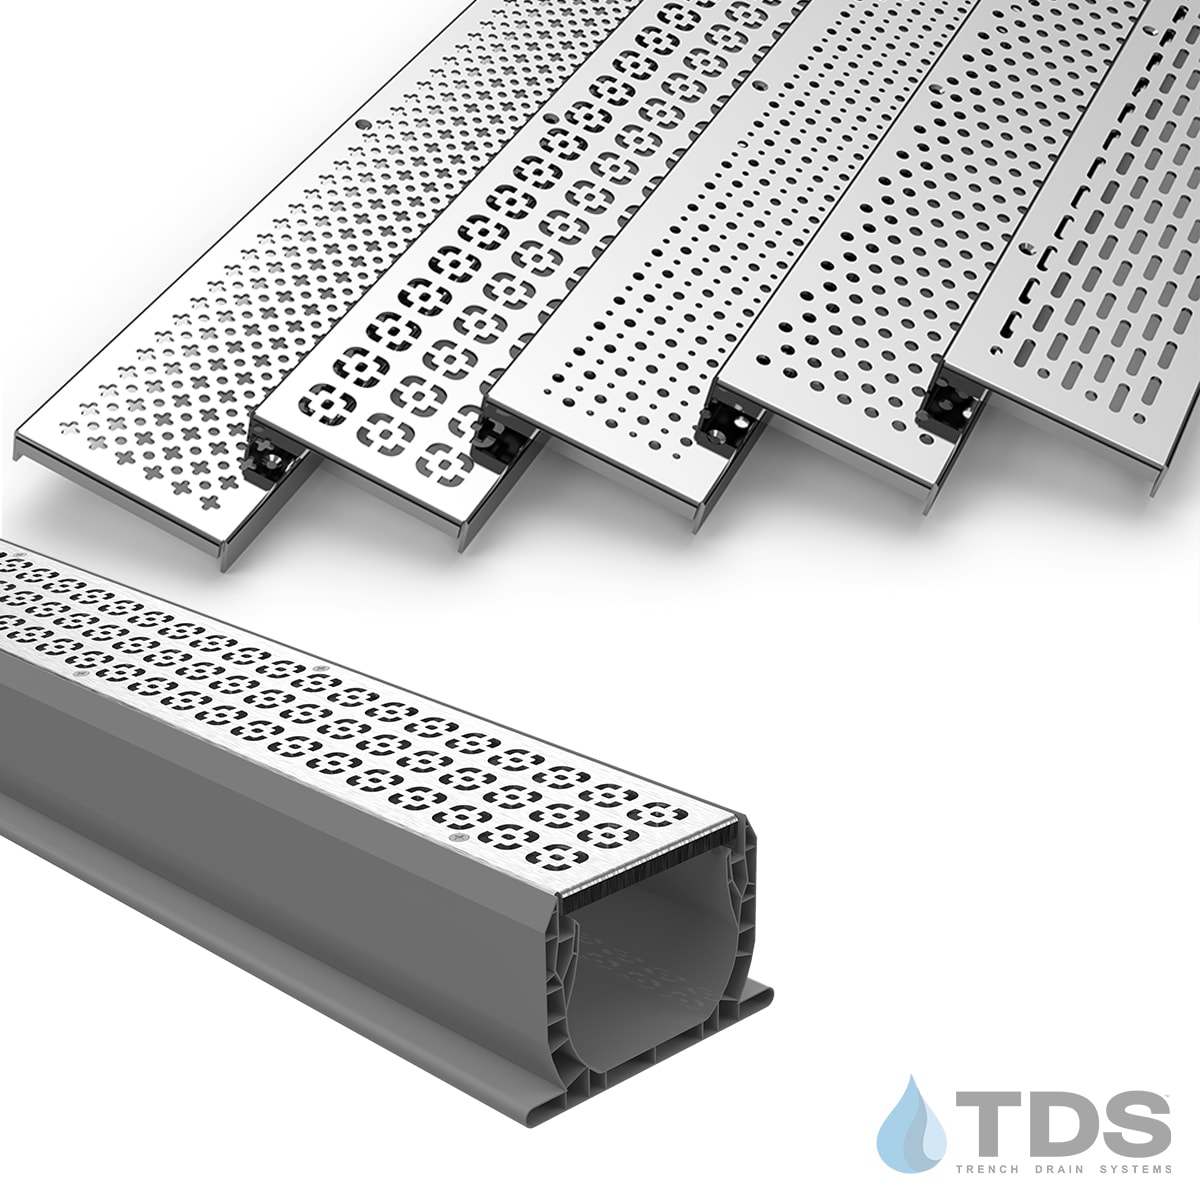 Trench Drain Systems now offers decorative grates in galvanized or stainless steel.